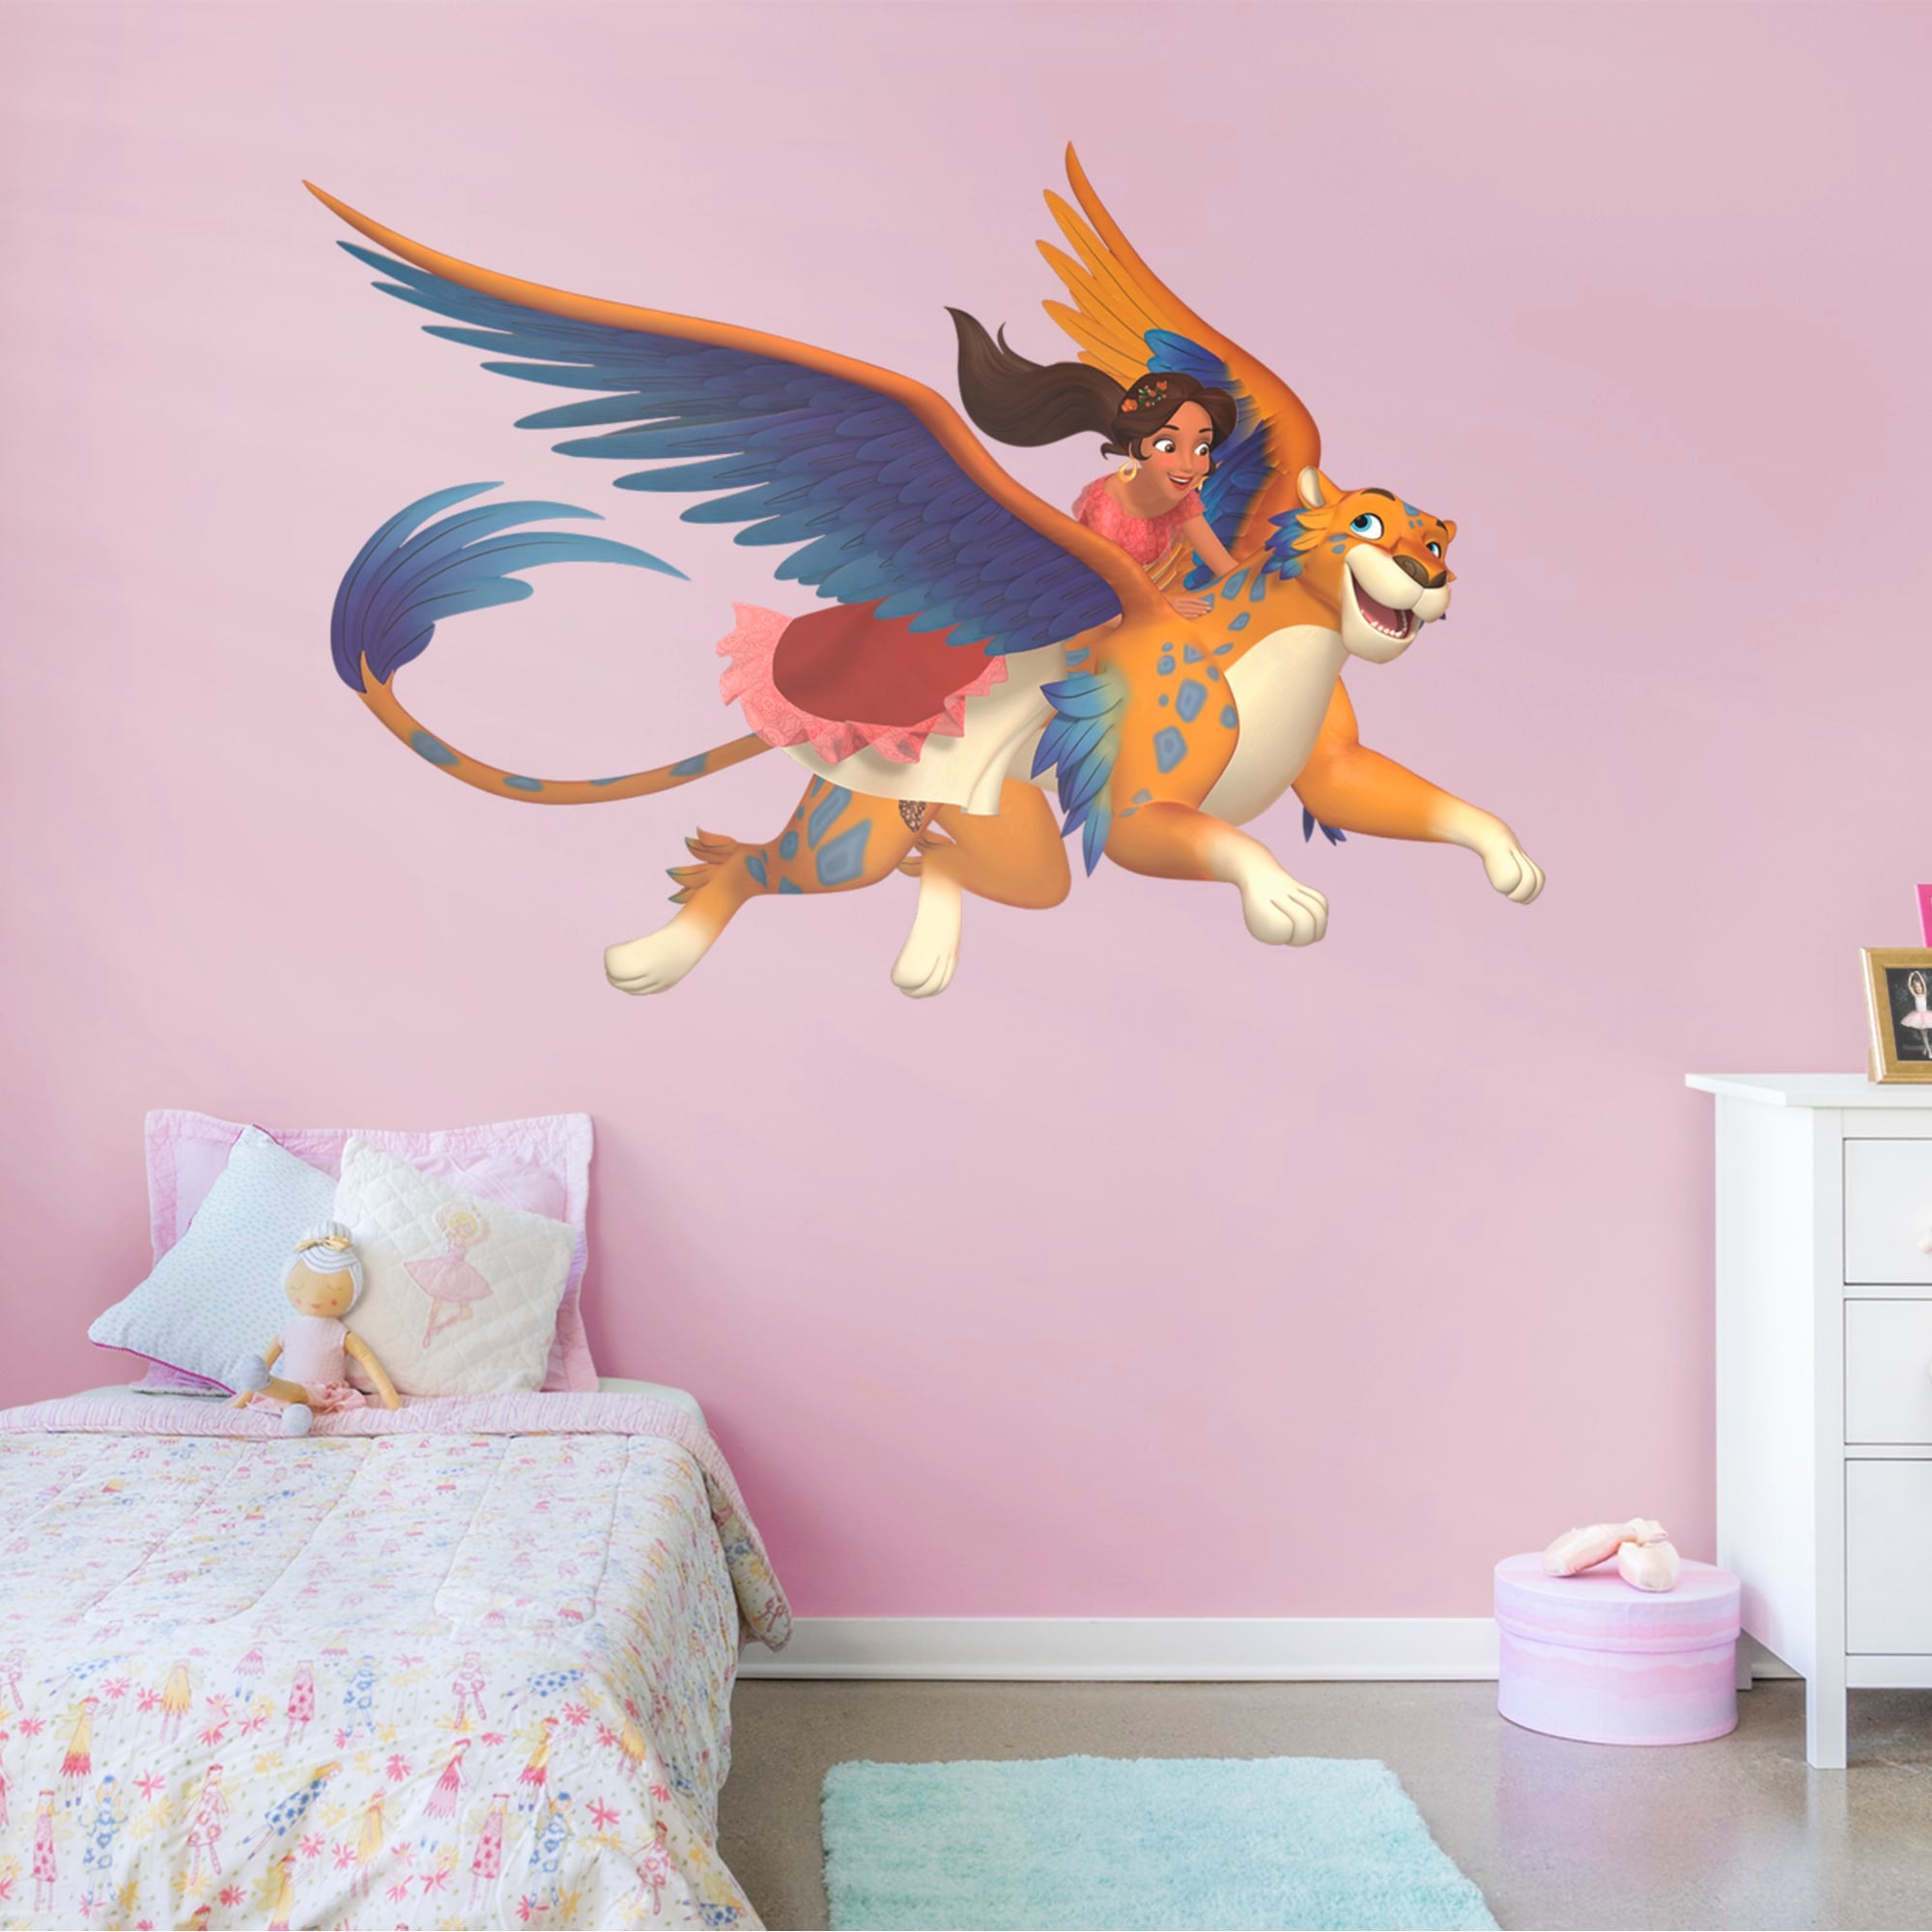 Elena of Avalor: Elena & Skylar - Officially Licensed Disney Removable Wall Decals 75.0"W x 52.0"H by Fathead | Vinyl